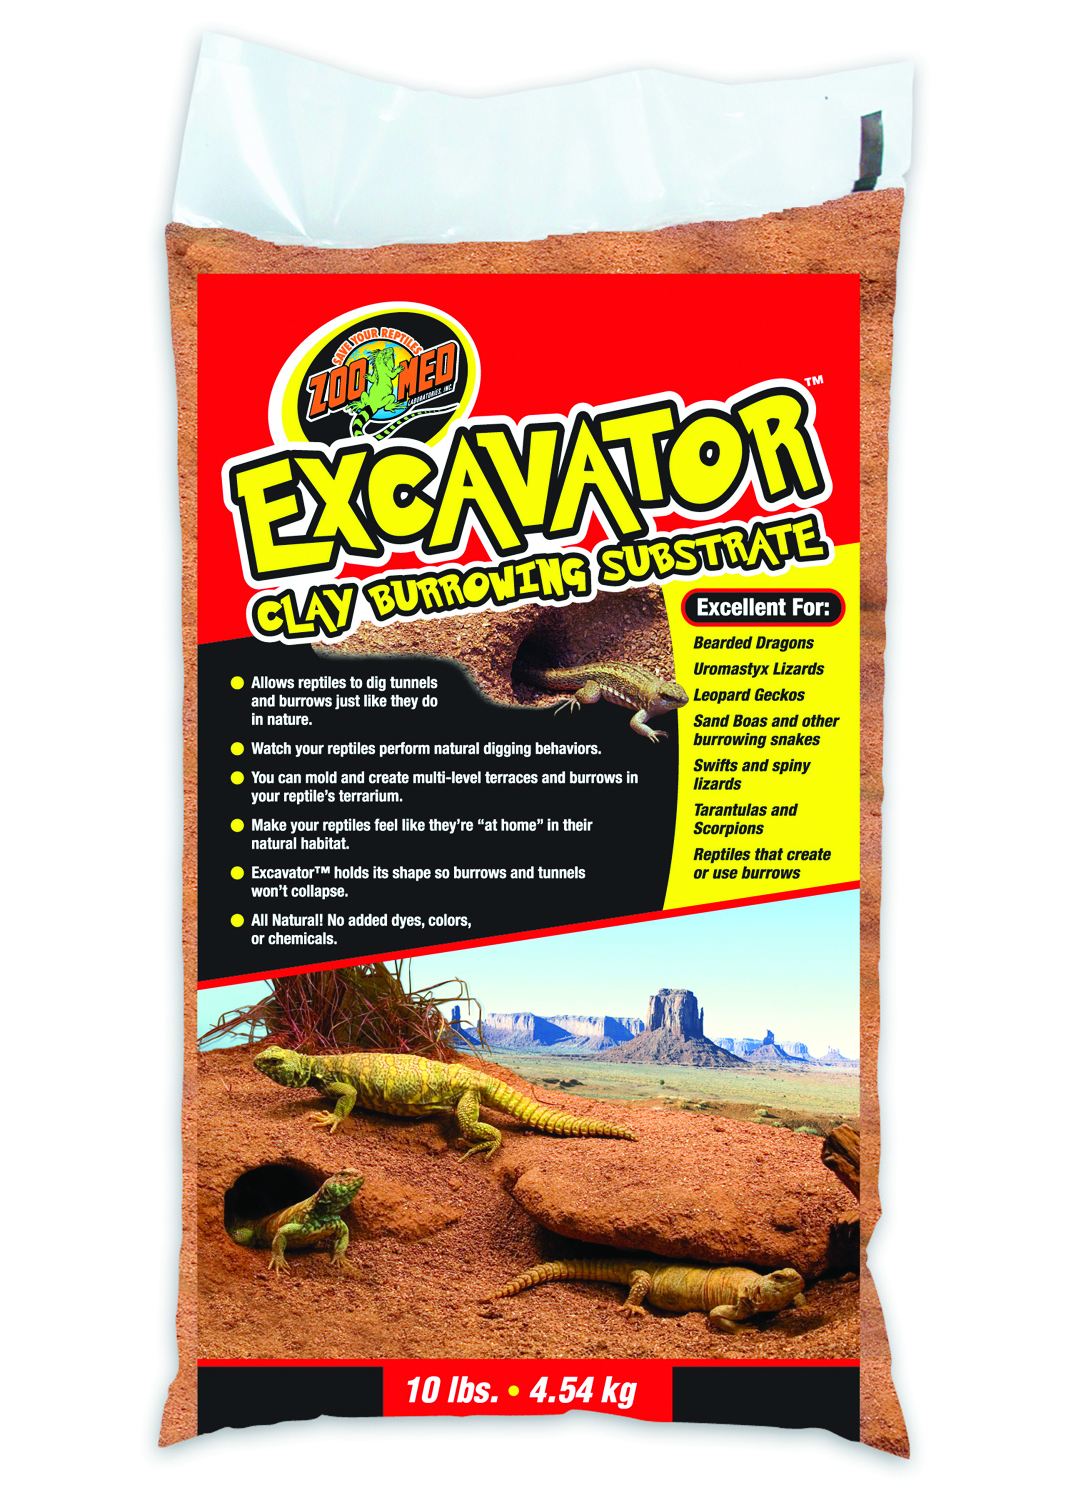 EXCAVATOR CLAY BURROW SUBSTRATE